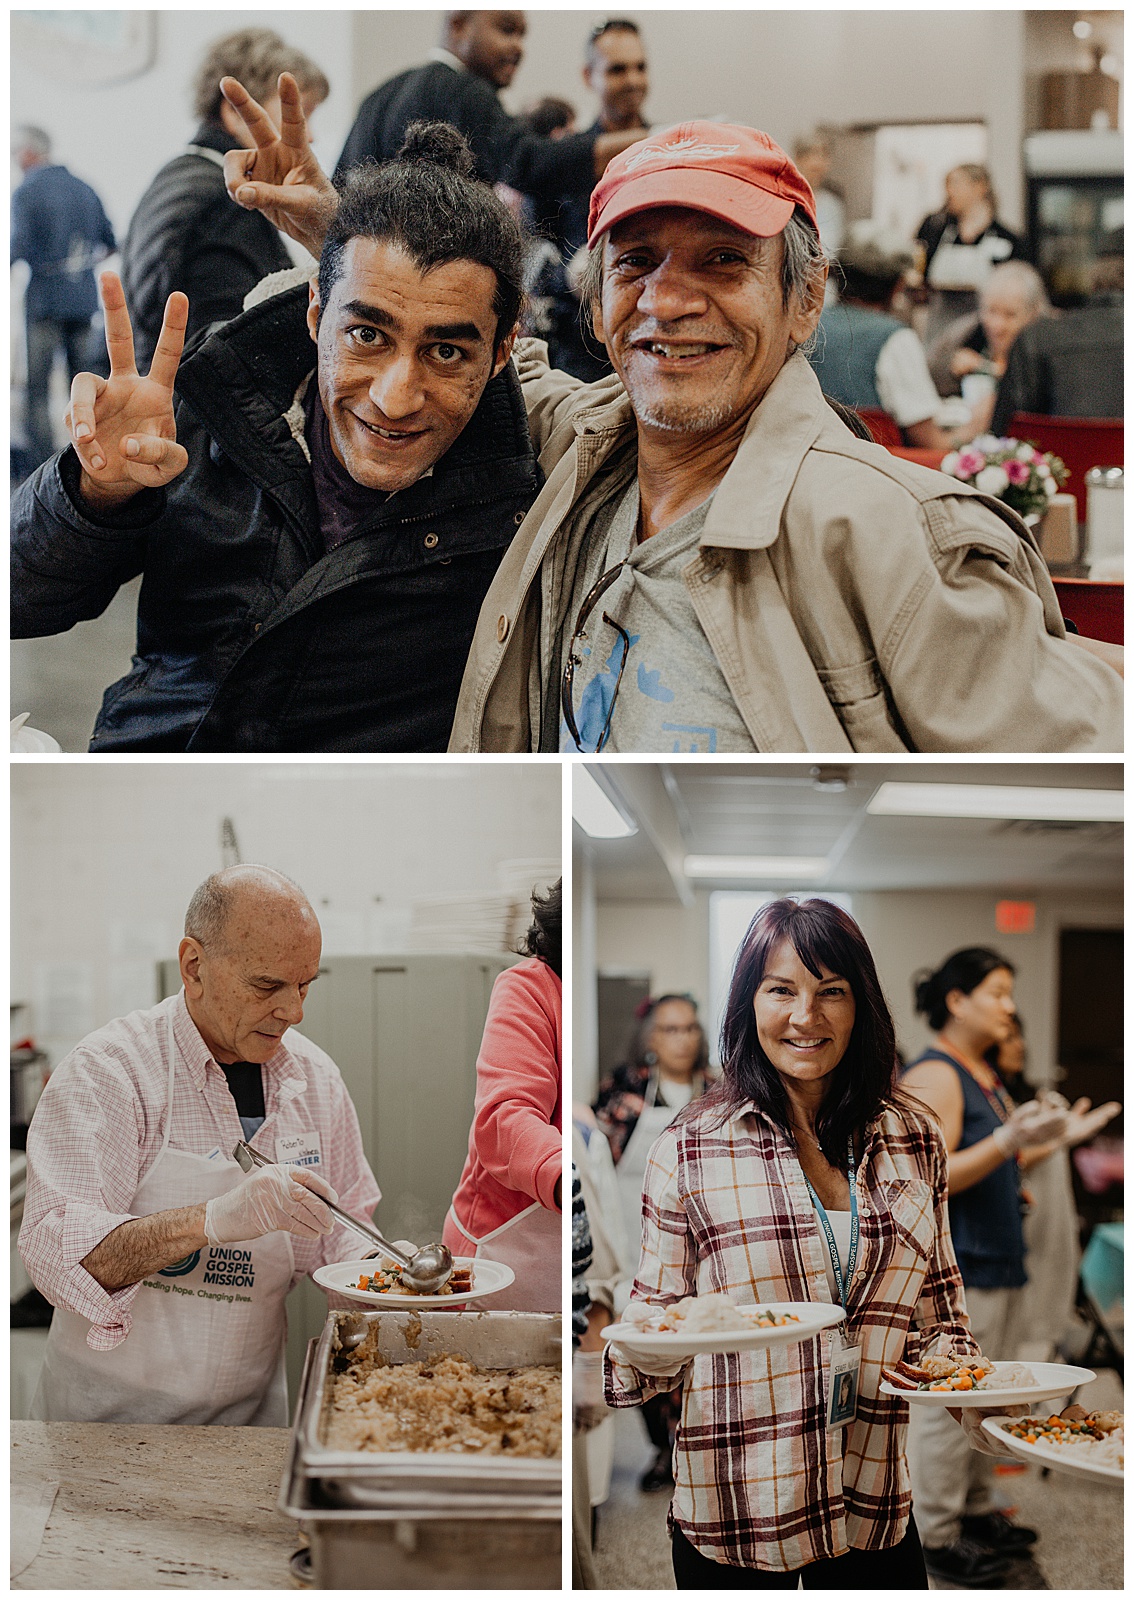 Easter Meal at Union Gospel Mission in Vancouver